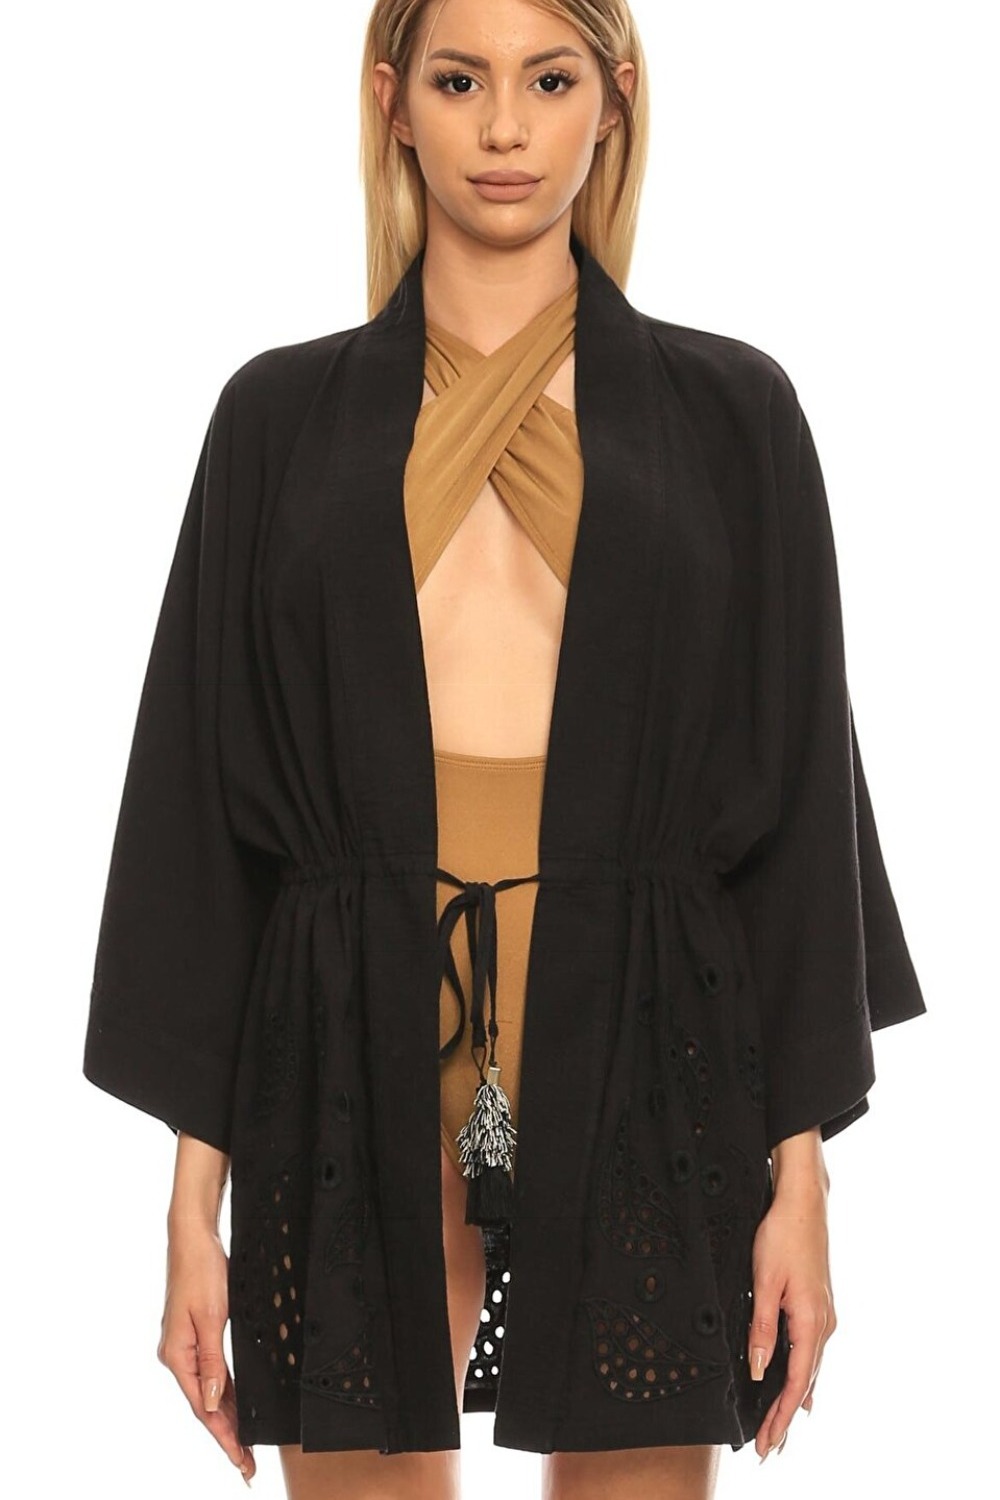 Alexandria Cotton Embroidered Short Black Kimono & Hegra Summer Trousers, Linen Side Slits, Ankle-tie Baggy Trousers